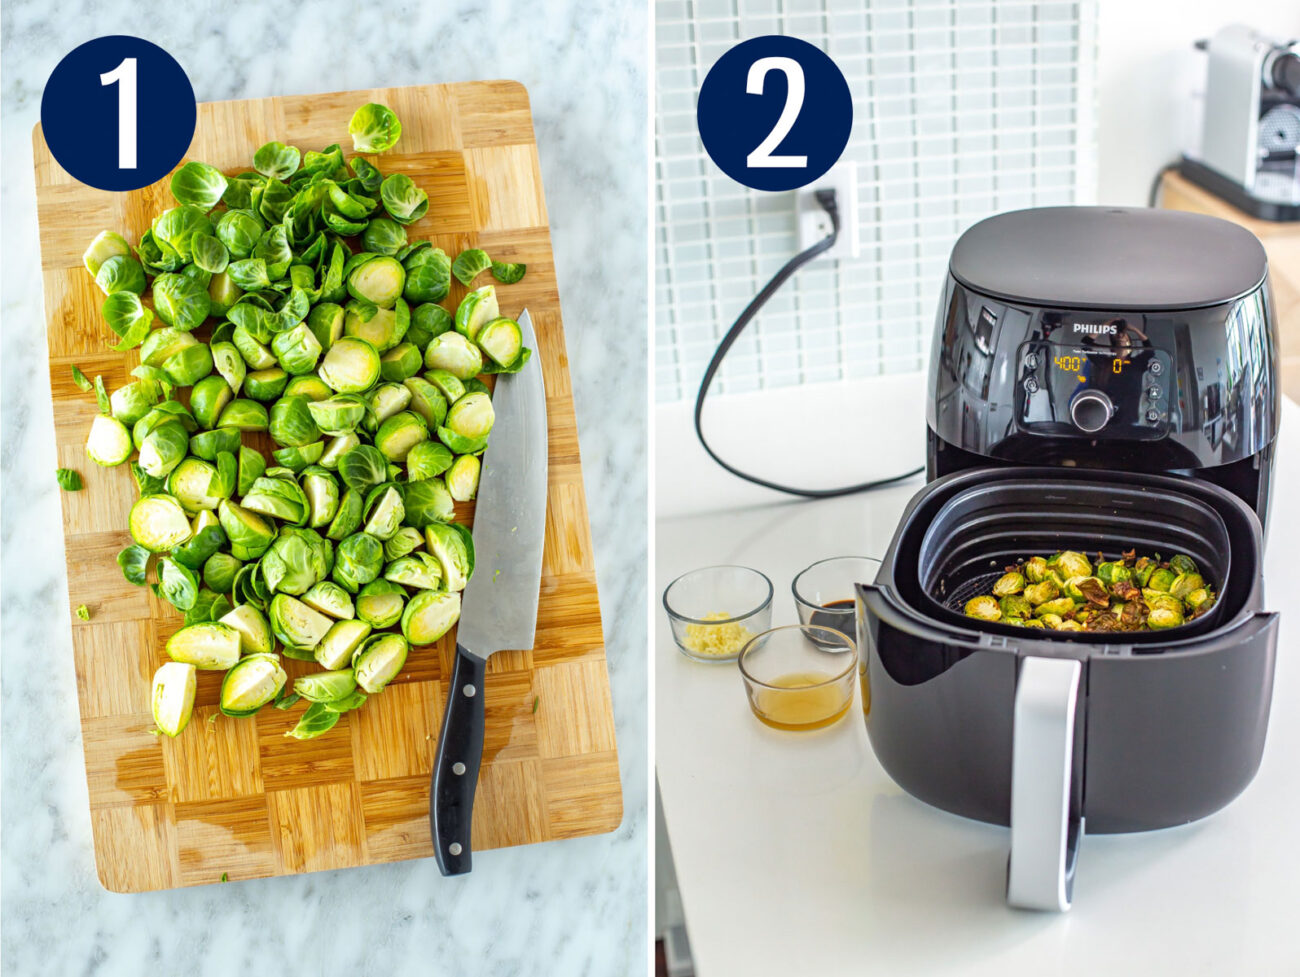 Steps 1 and 2 for making air fryer brussels sprouts: Prepare brussels sprouts and preheat air fryer.